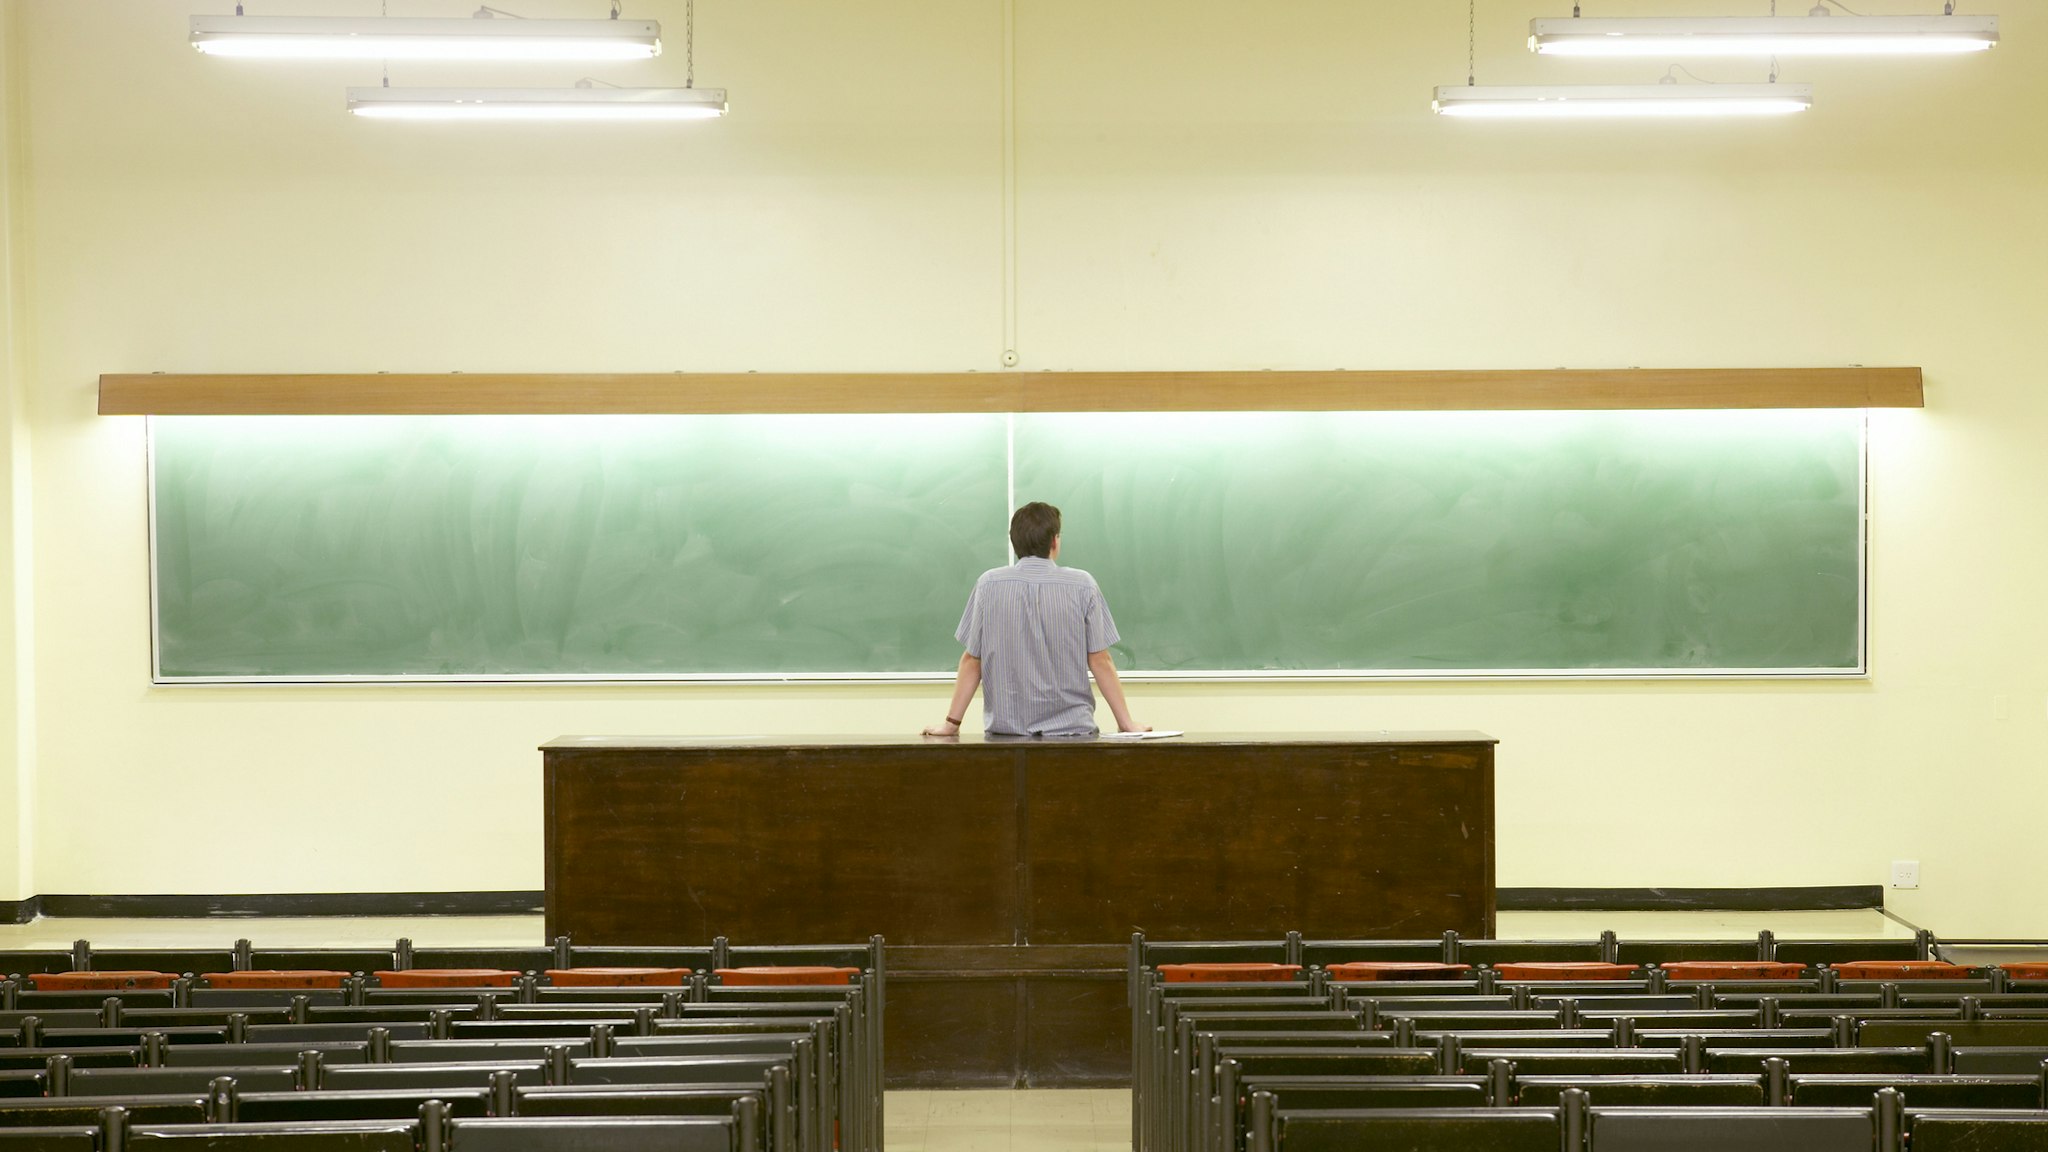 Man Staring at Blackboard in Empty Lecture Hall - stock photo